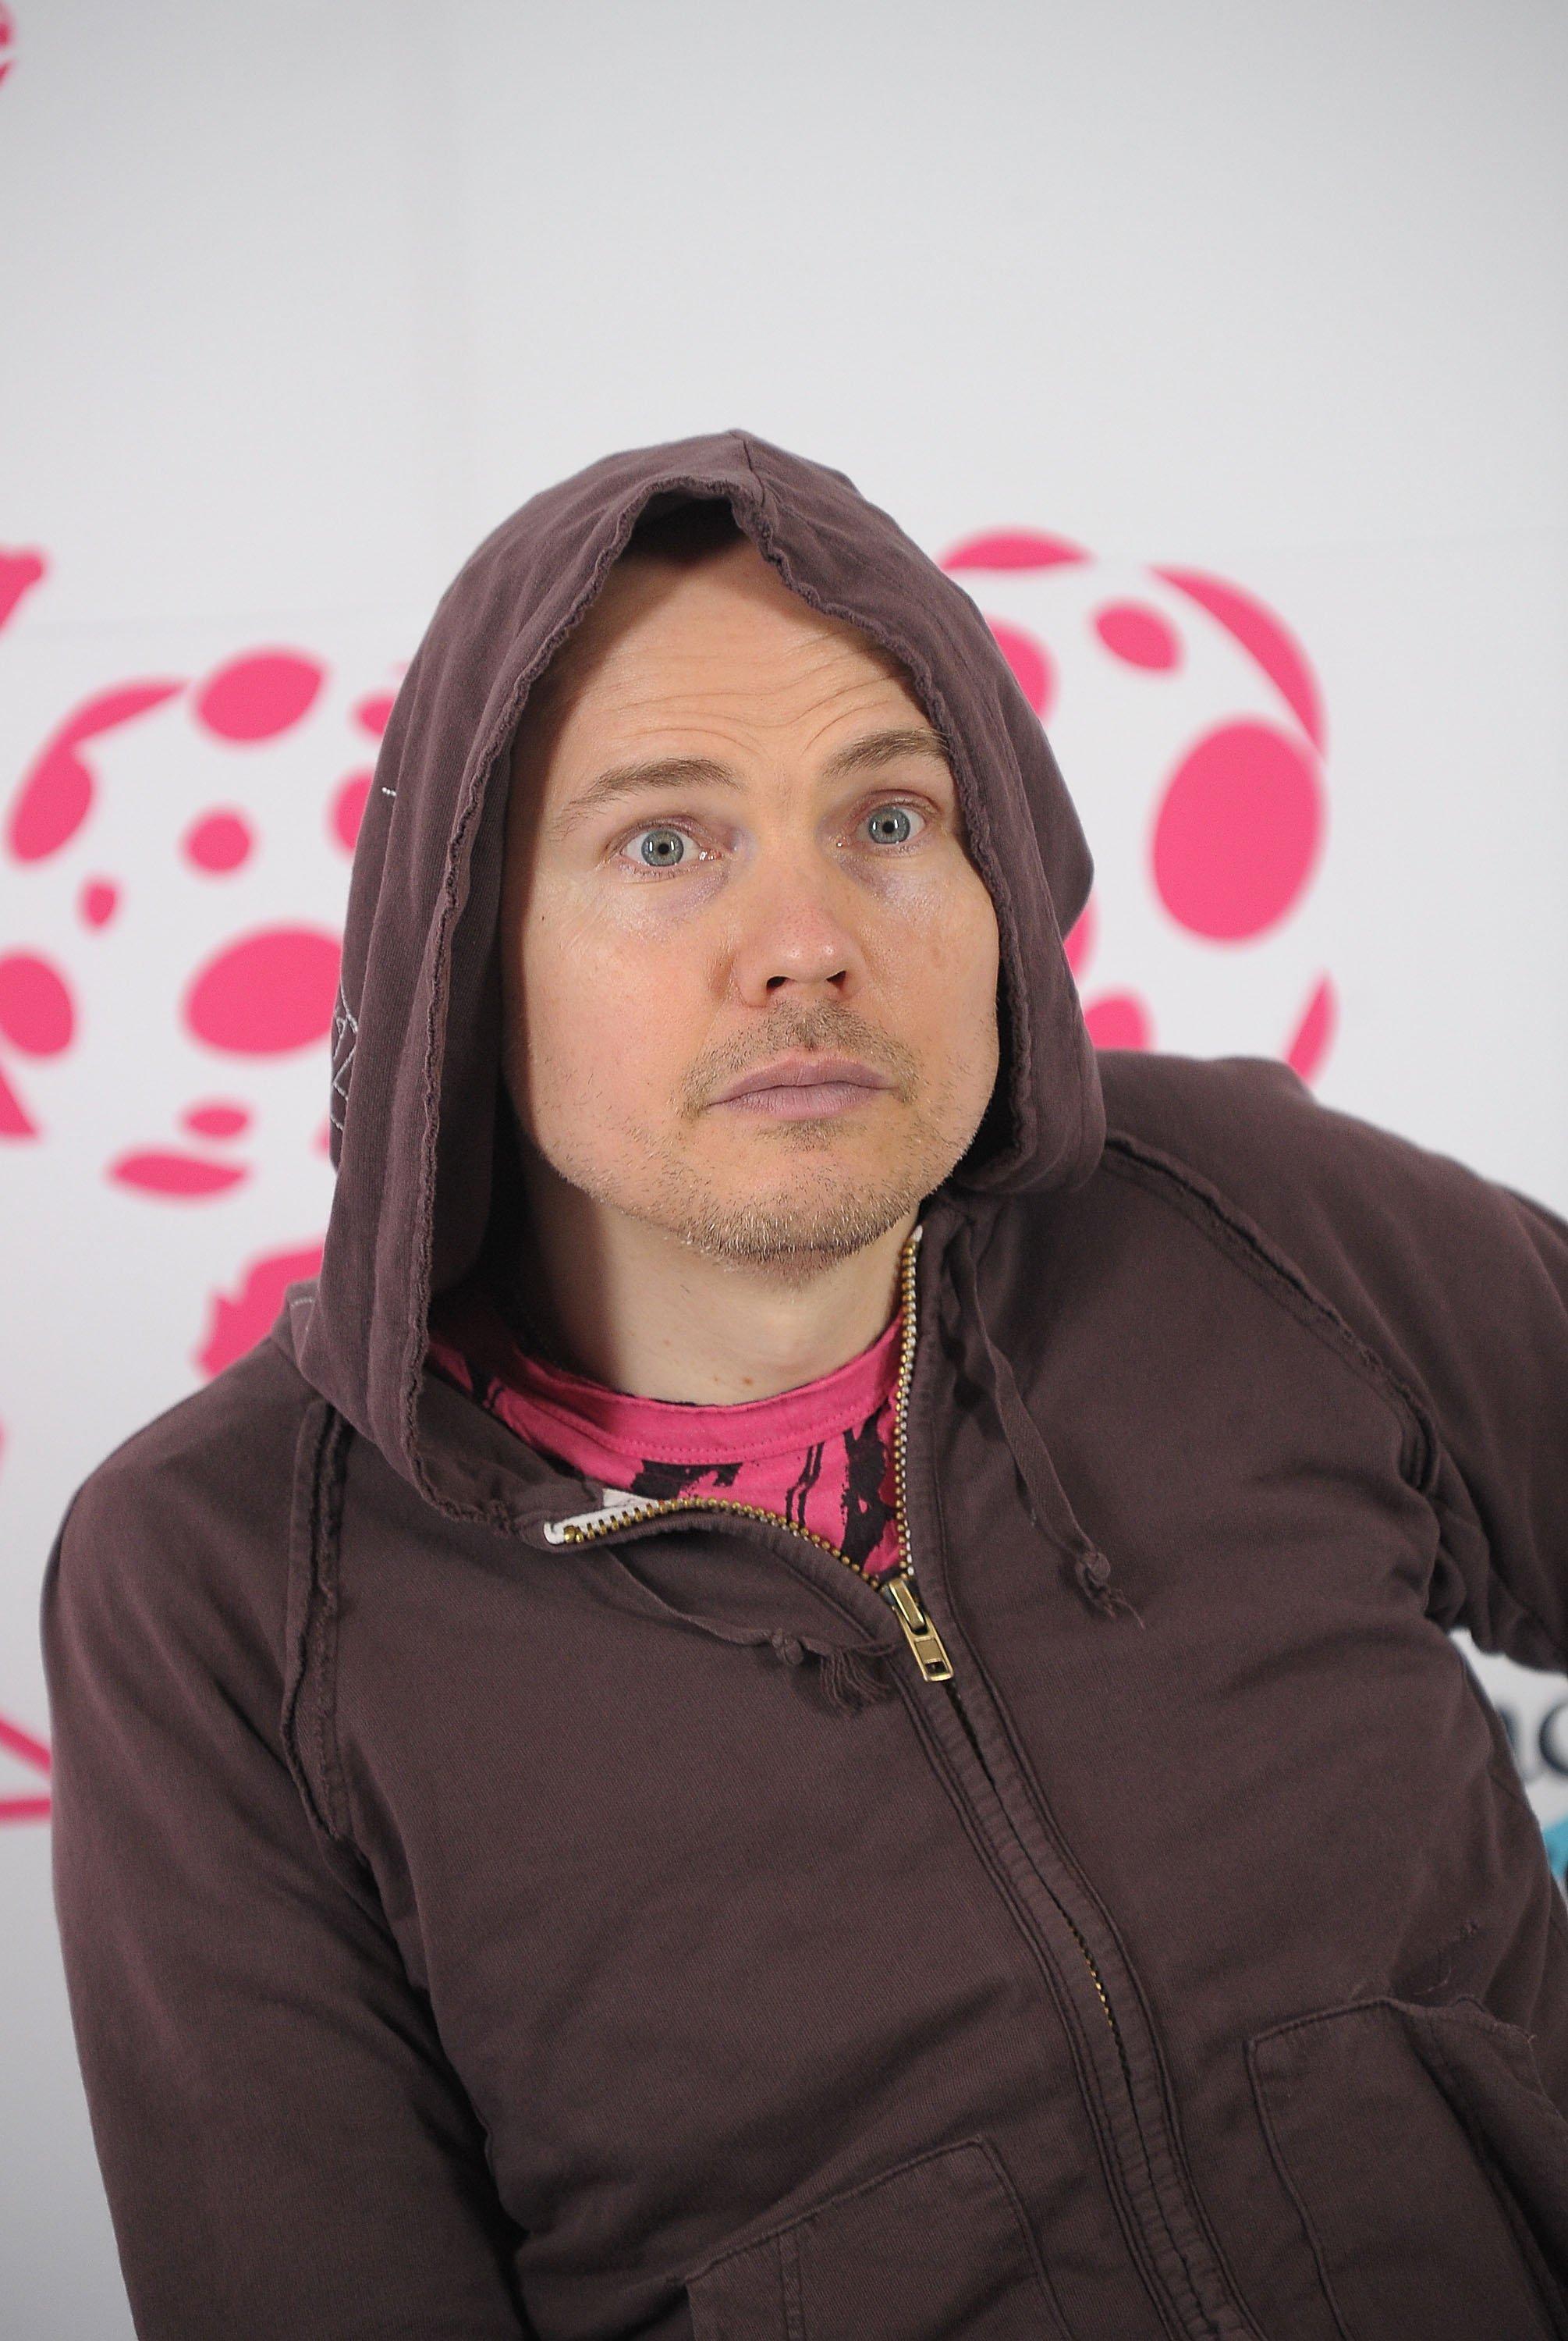 The Week In Music: Is Billy Corgan Just A Wrestler In A Cage